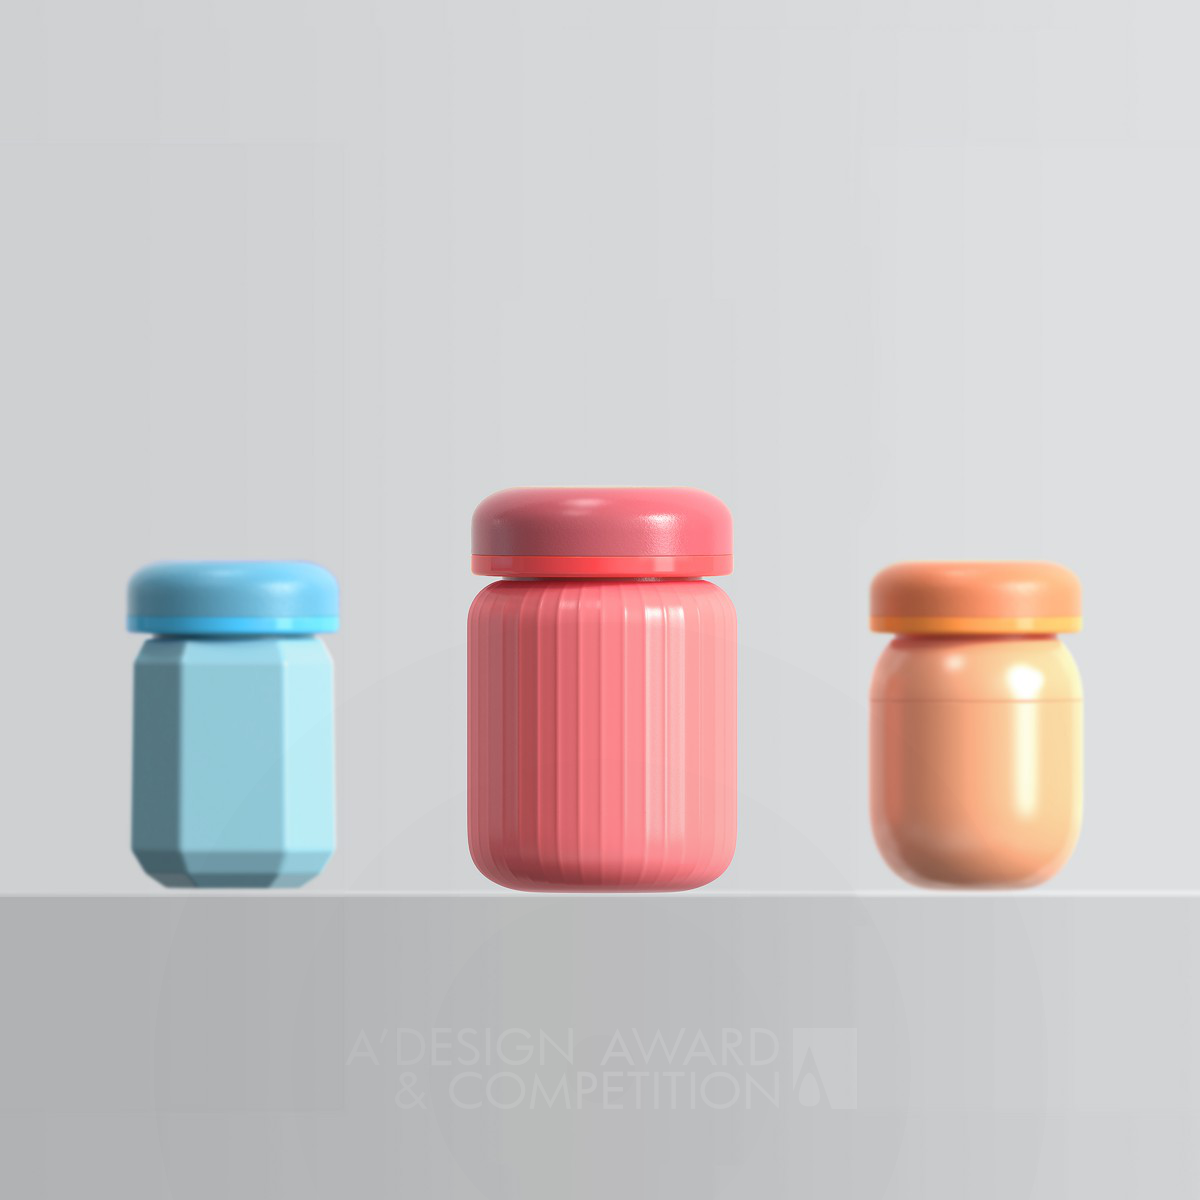 The Sweety Candy Jar